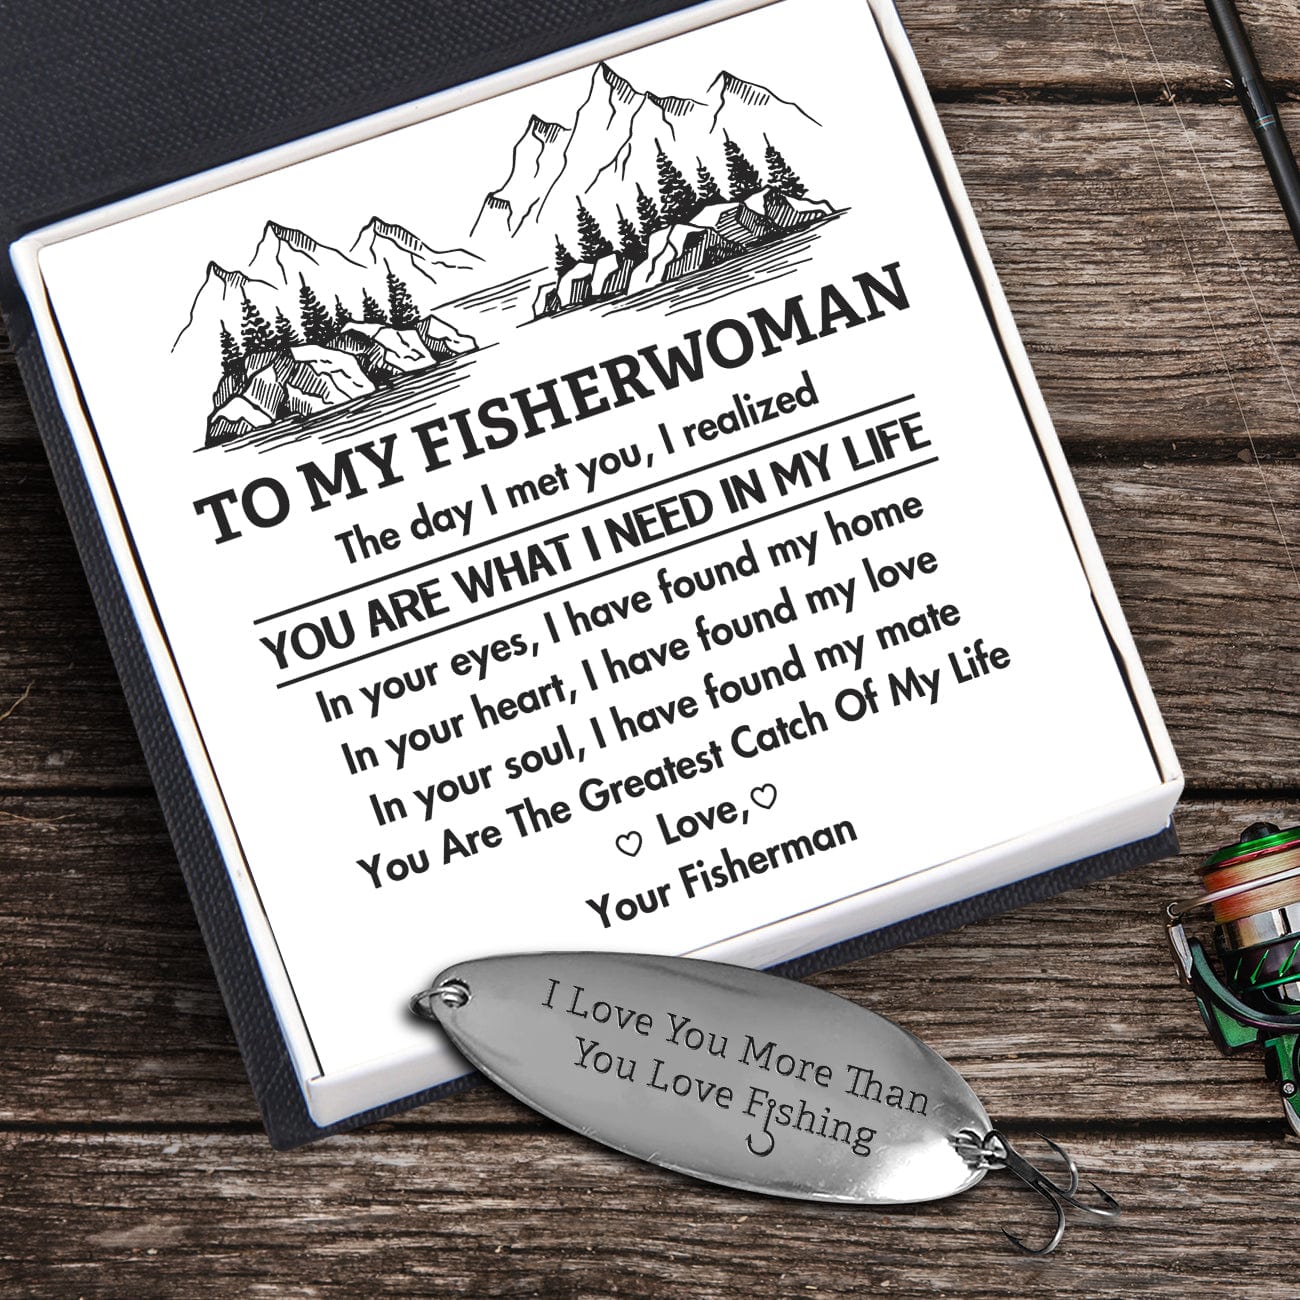 Fishing Gifts Collection Page 18 - Wrapsify